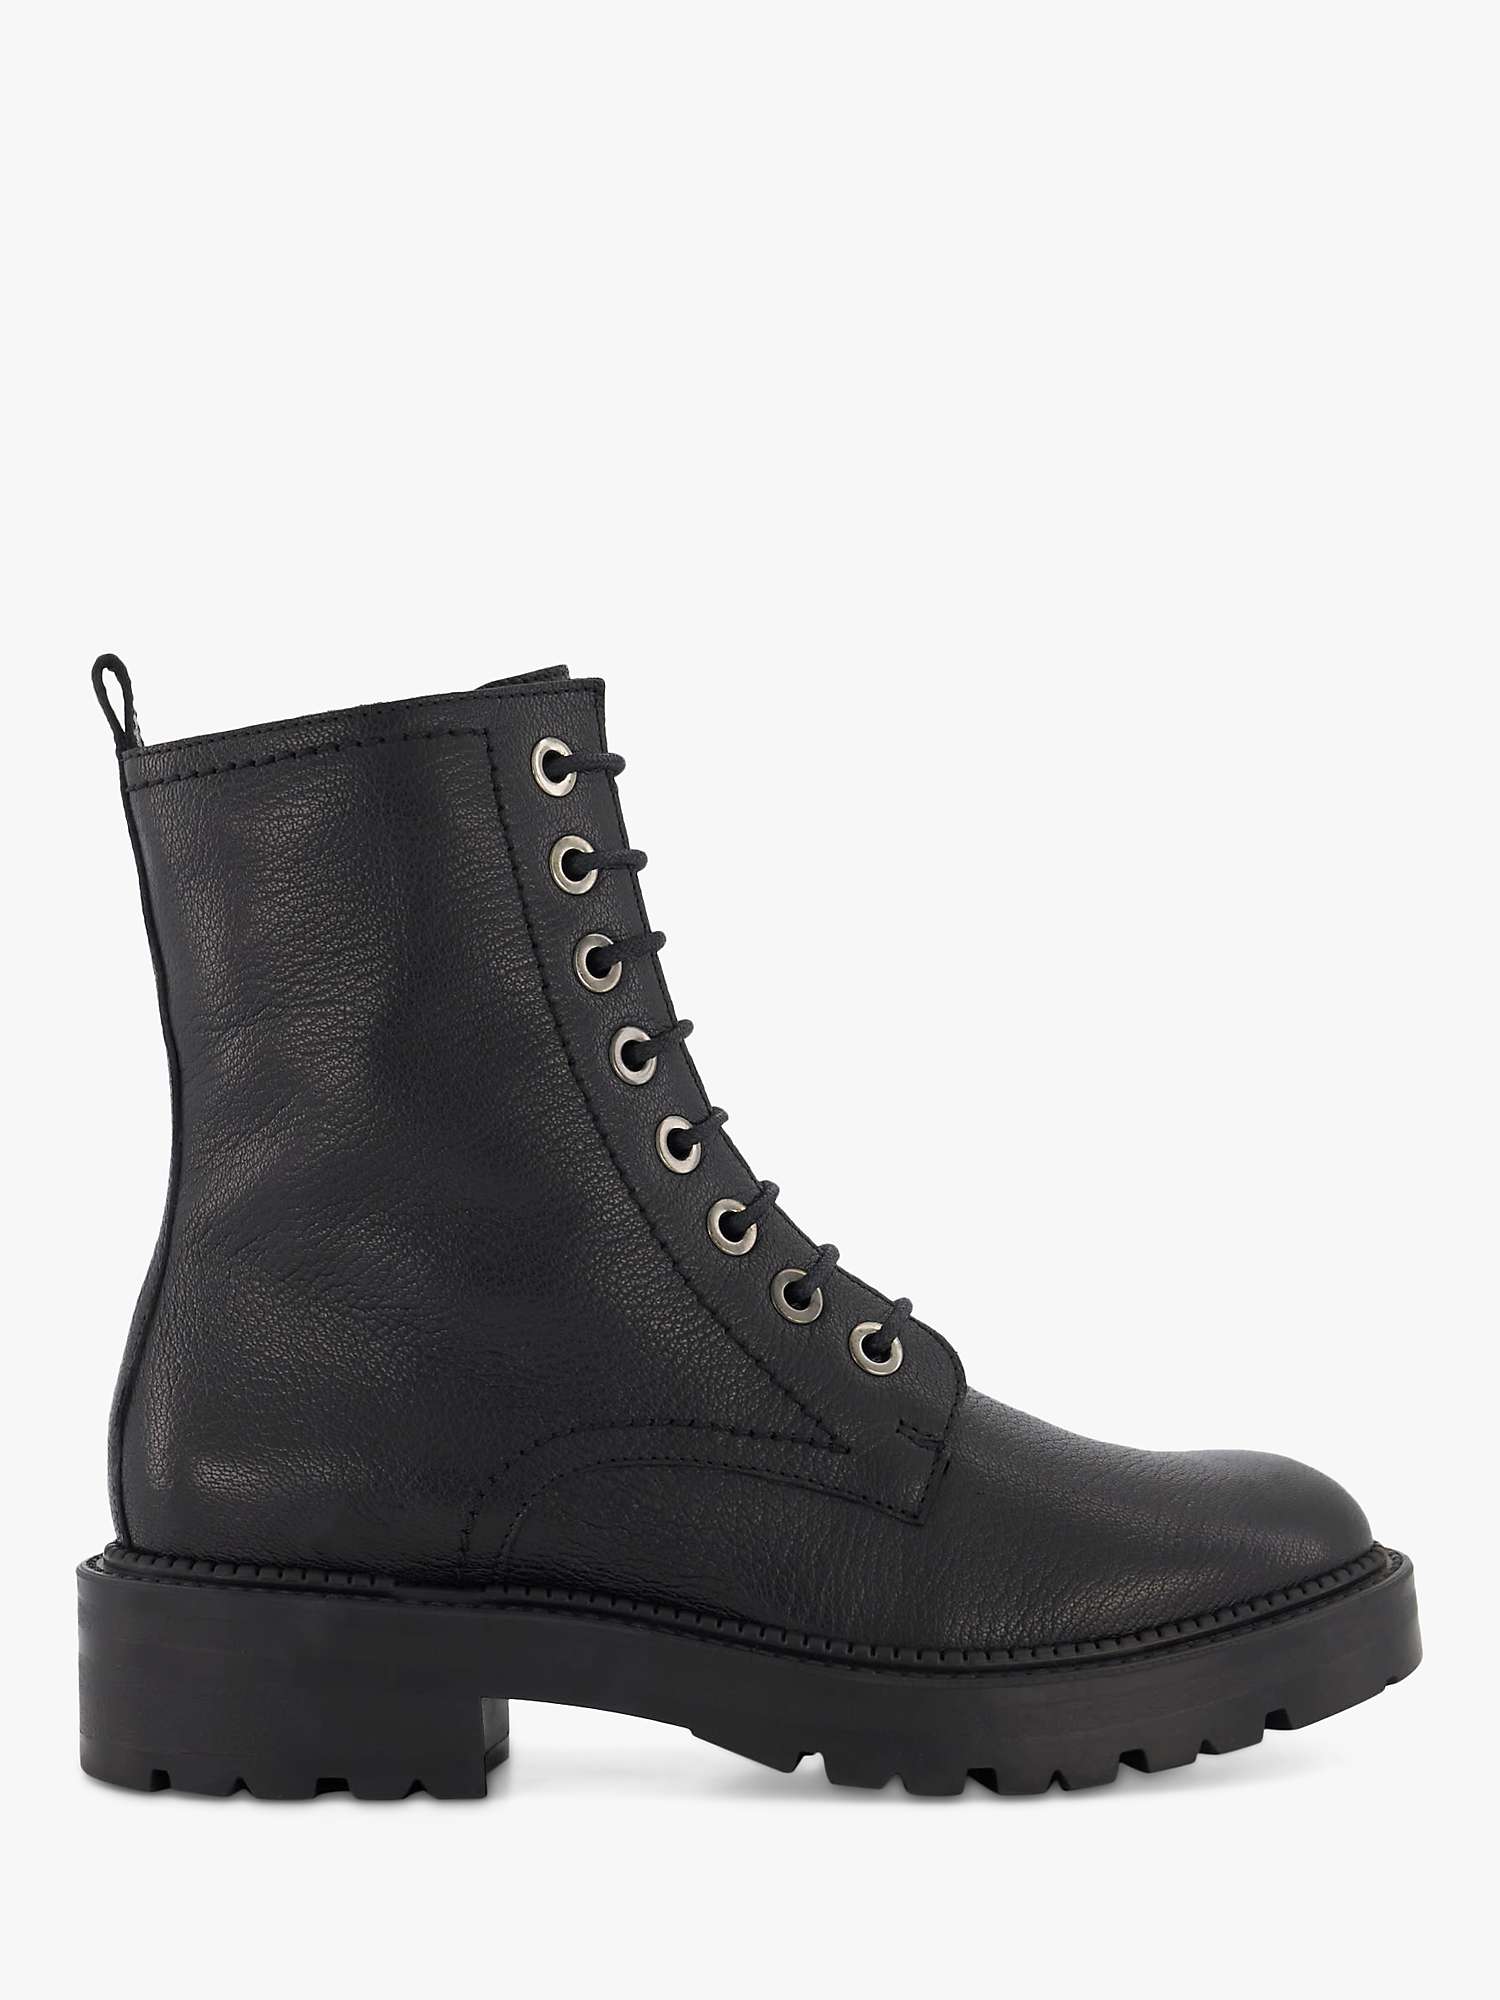 Buy Dune Press Leather Cleated Hiker Boots, Black Online at johnlewis.com